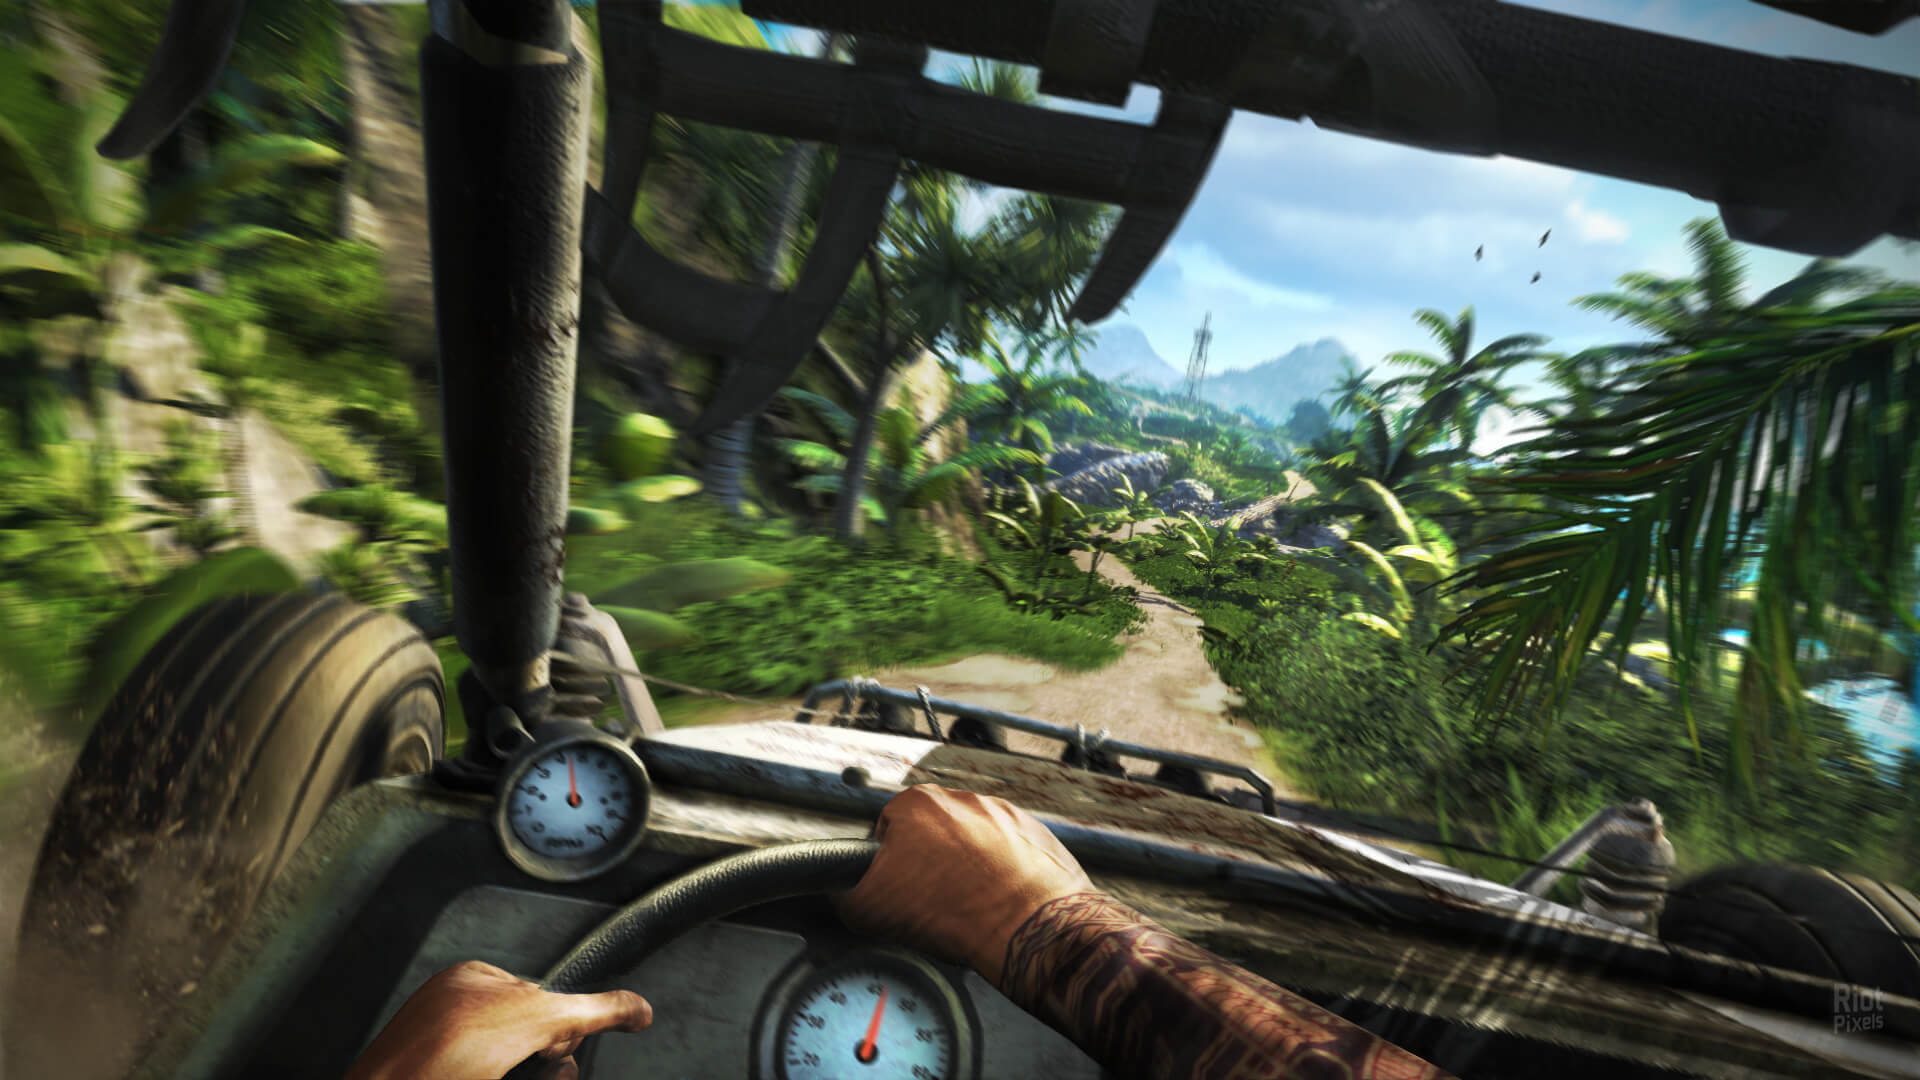 DOWNLOAD FAR CRY 3 HIGHLY COMPRESSED FOR PC IN 500 MB PARTS - TRAX GAMING CENTER